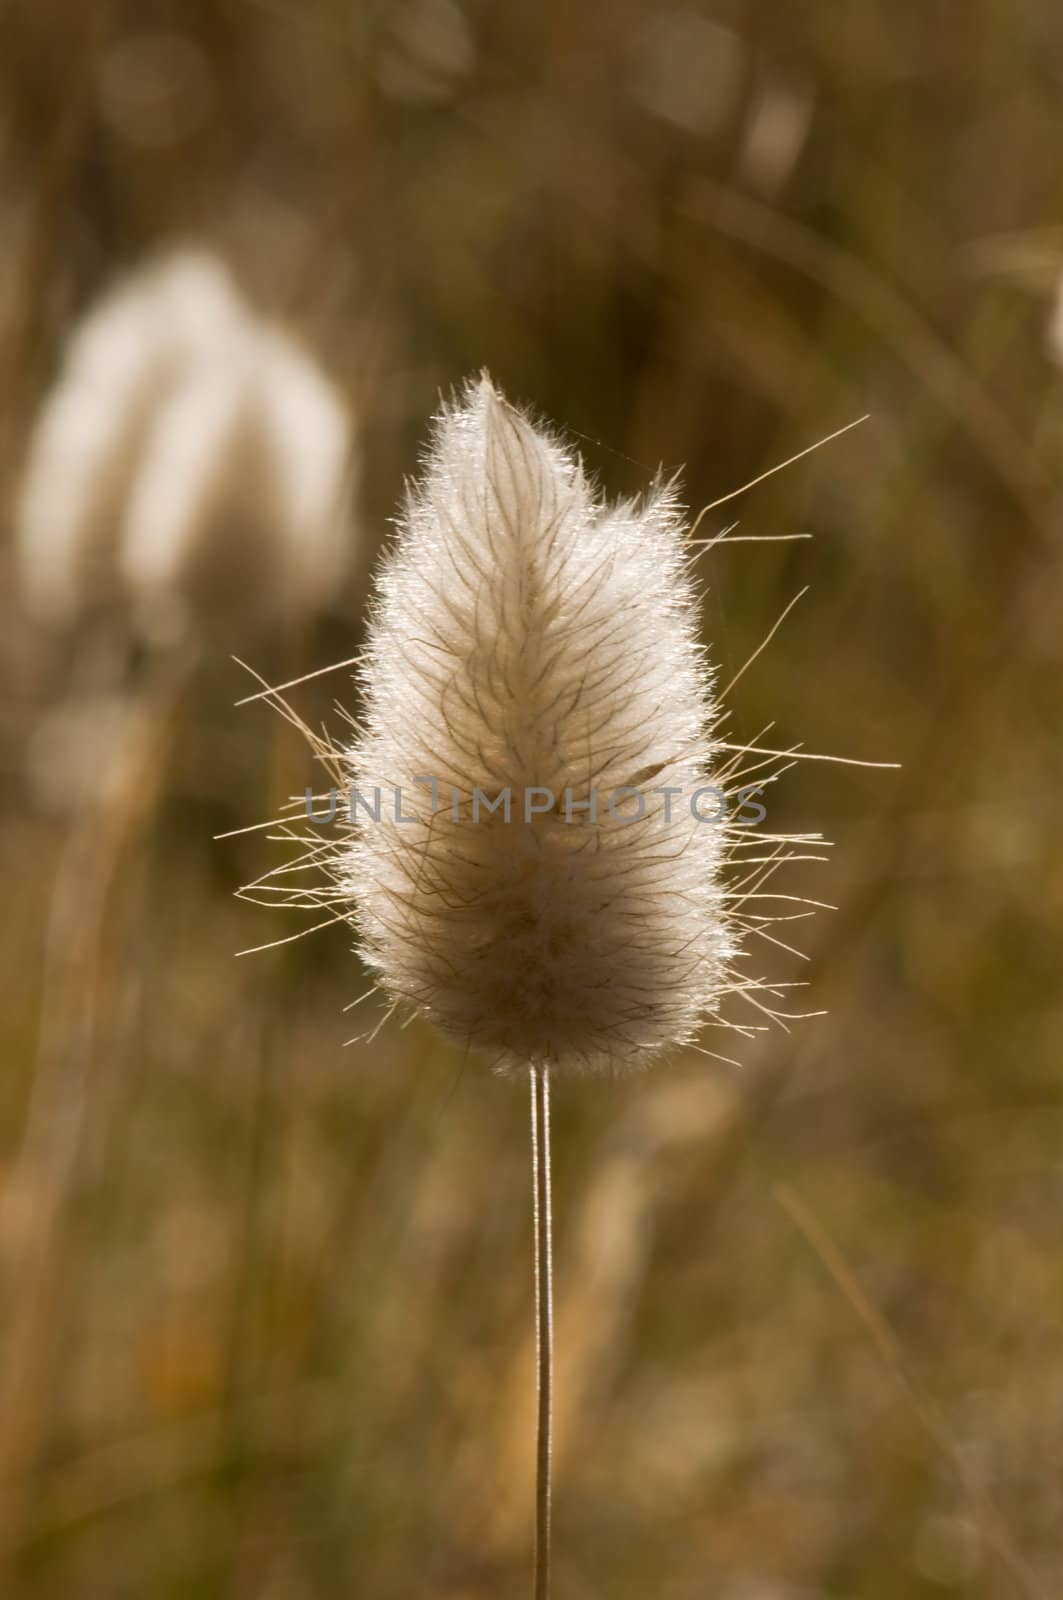 A beautiful blossom, seed pod with beautiful sun reflection, sharp focus and very soft background